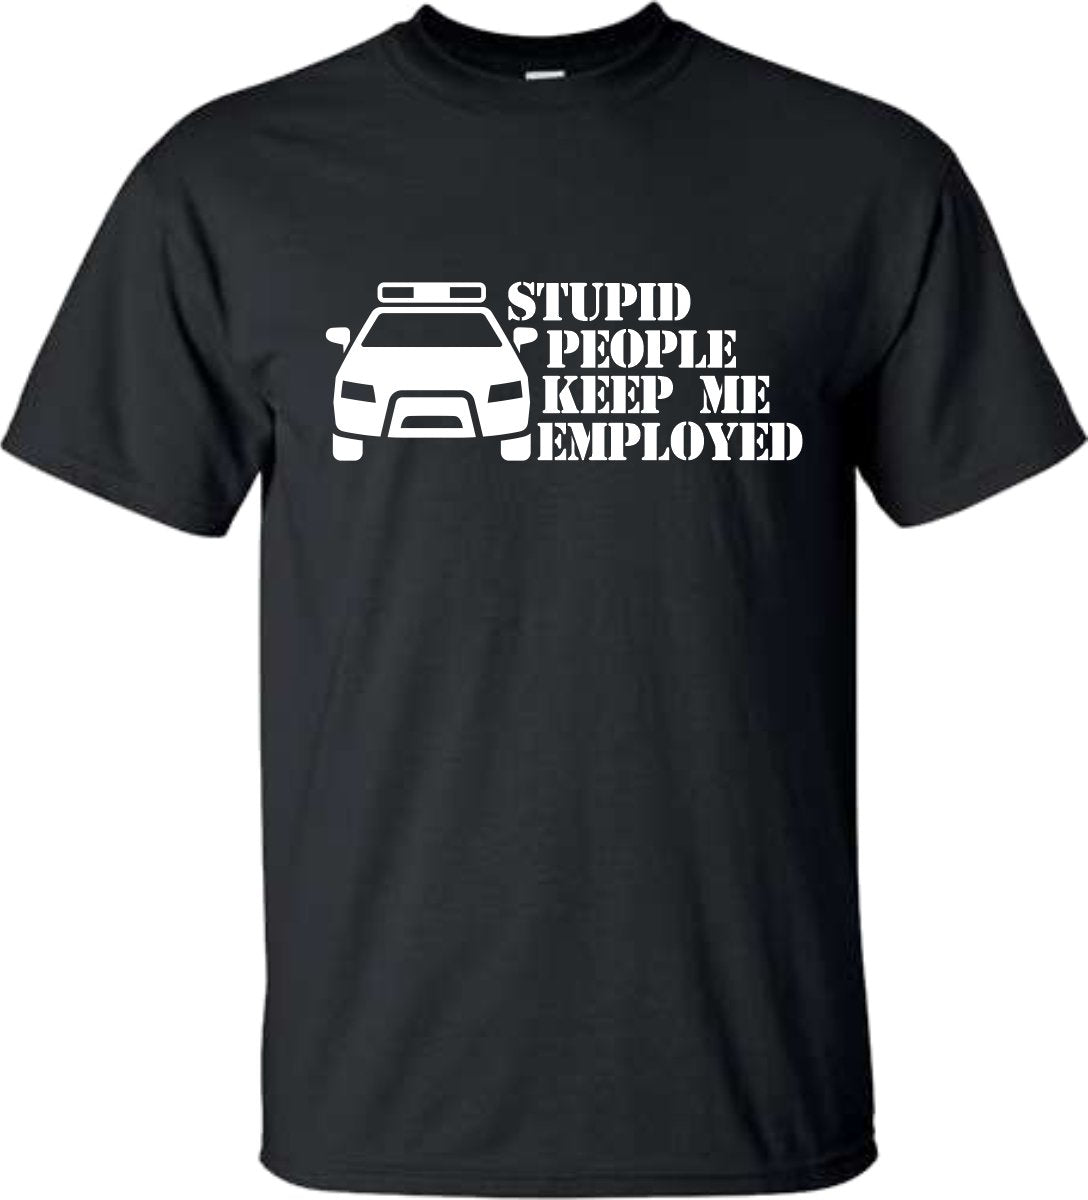 Police T Shirt Stupid People Keep Me Employed ** - SBS T Shop